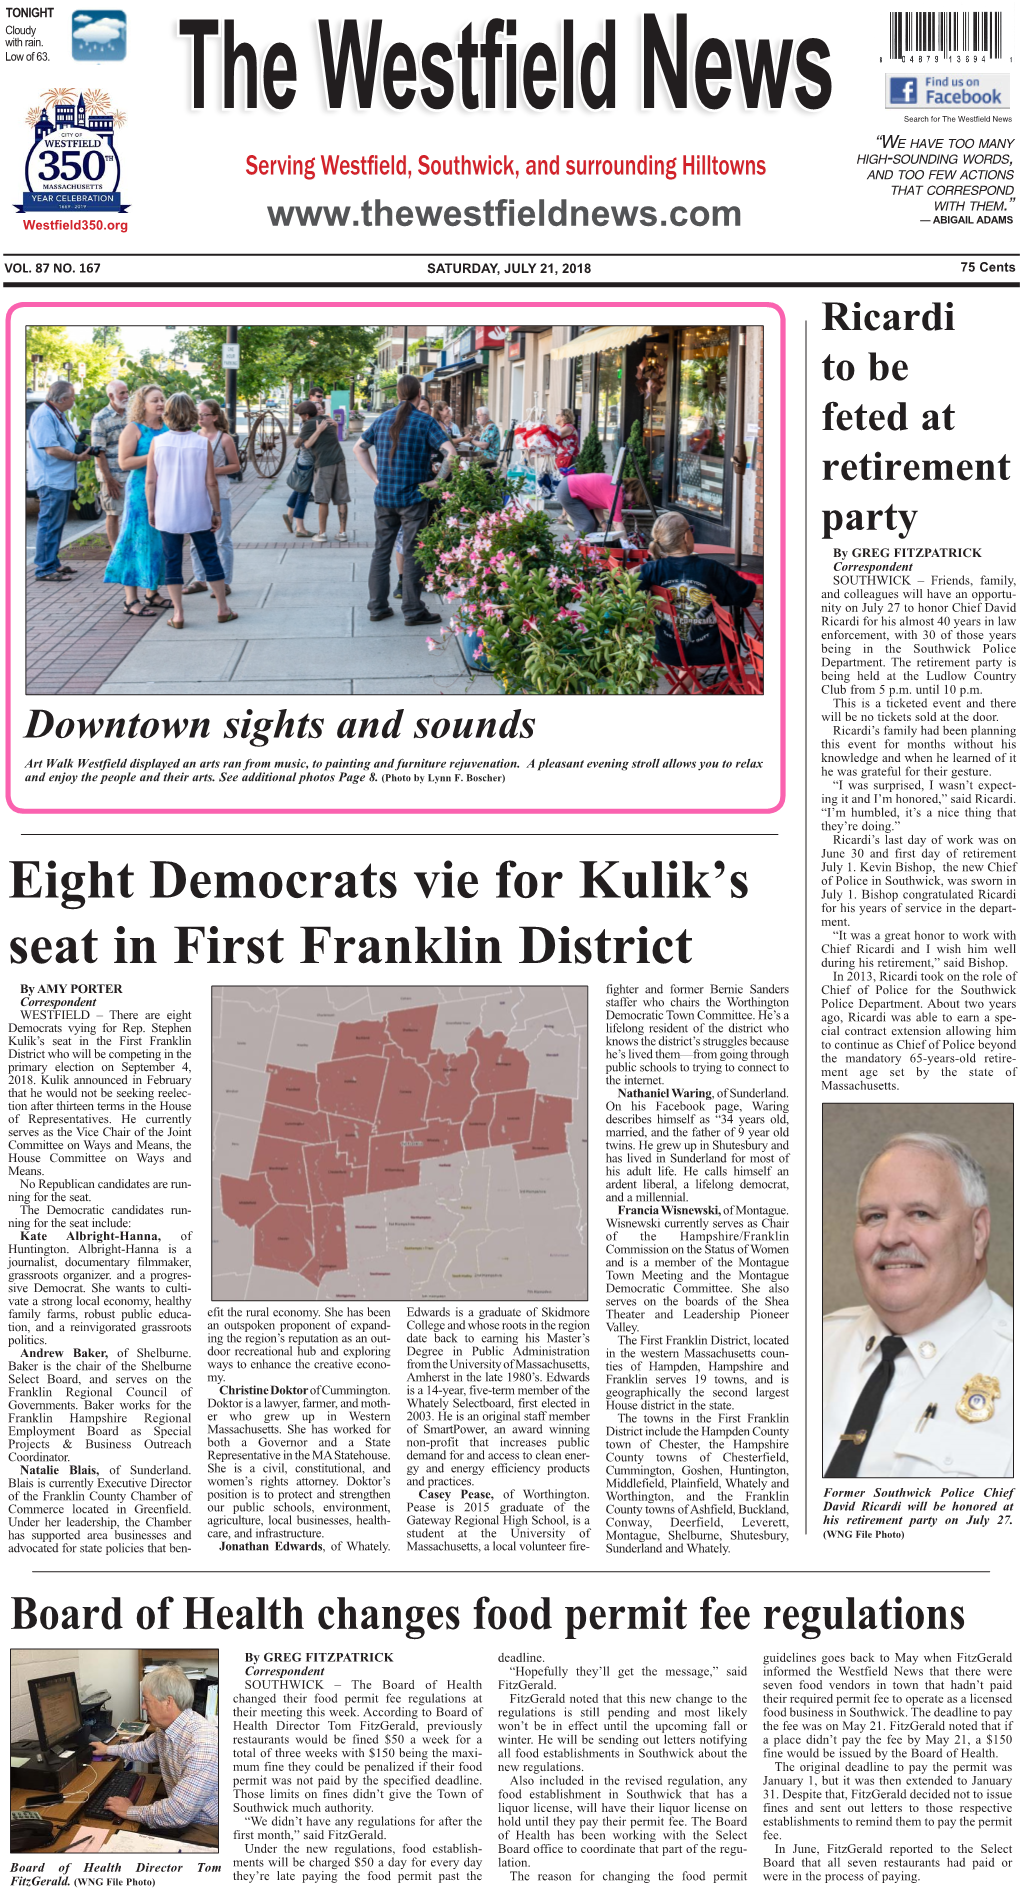 Eight Democrats Vie for Kulik's Seat in First Franklin District